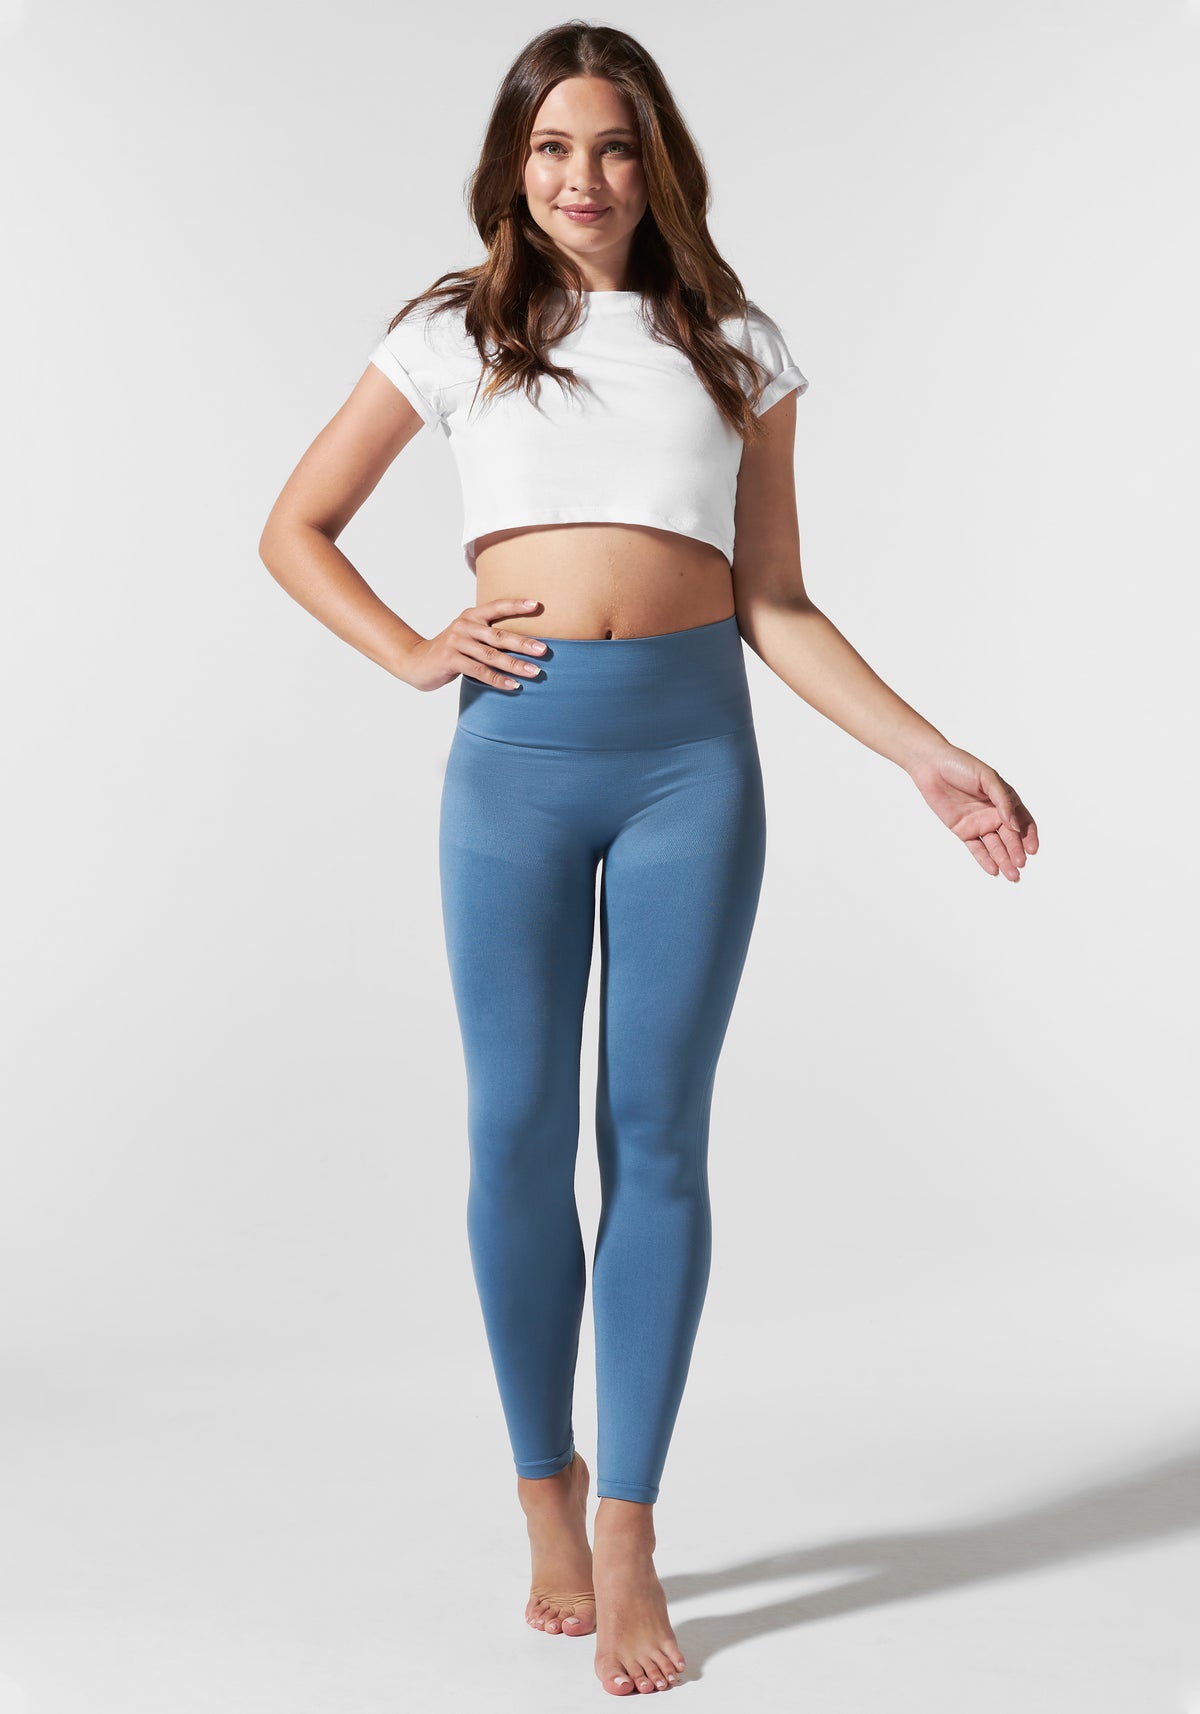 Are Blanqi Leggings Worth It In 2021